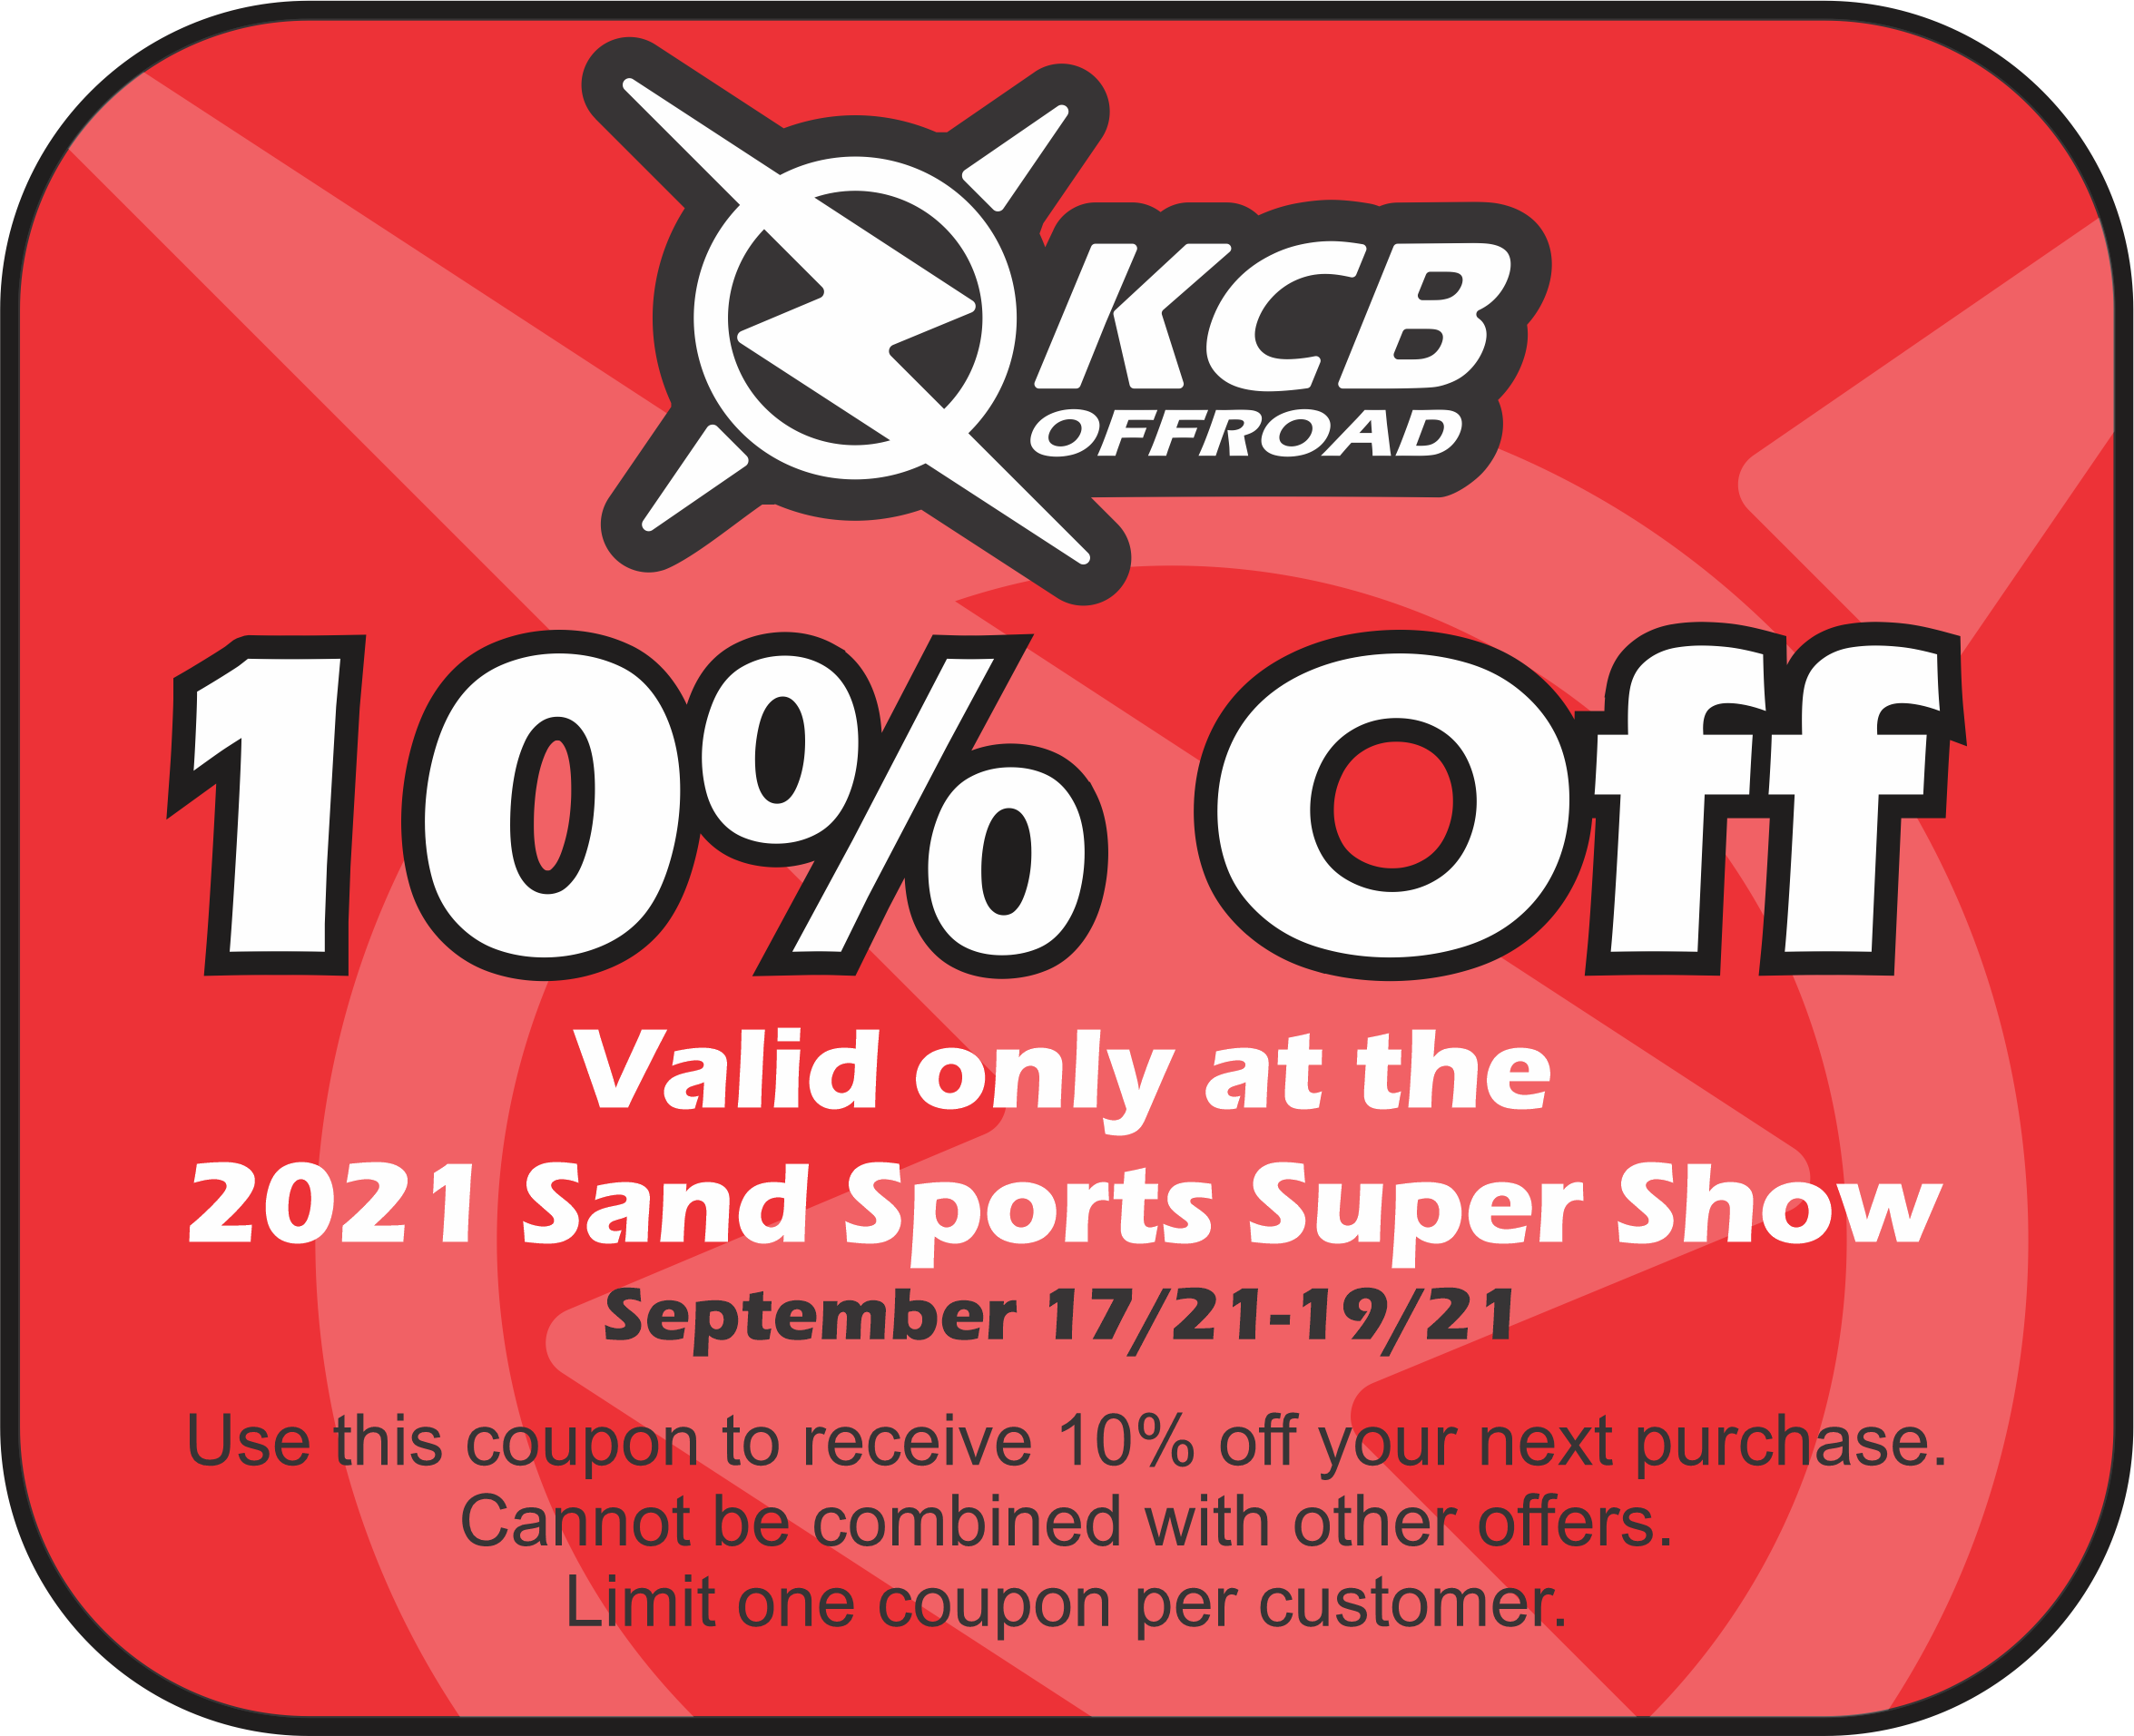 KCB Offroad Show Special